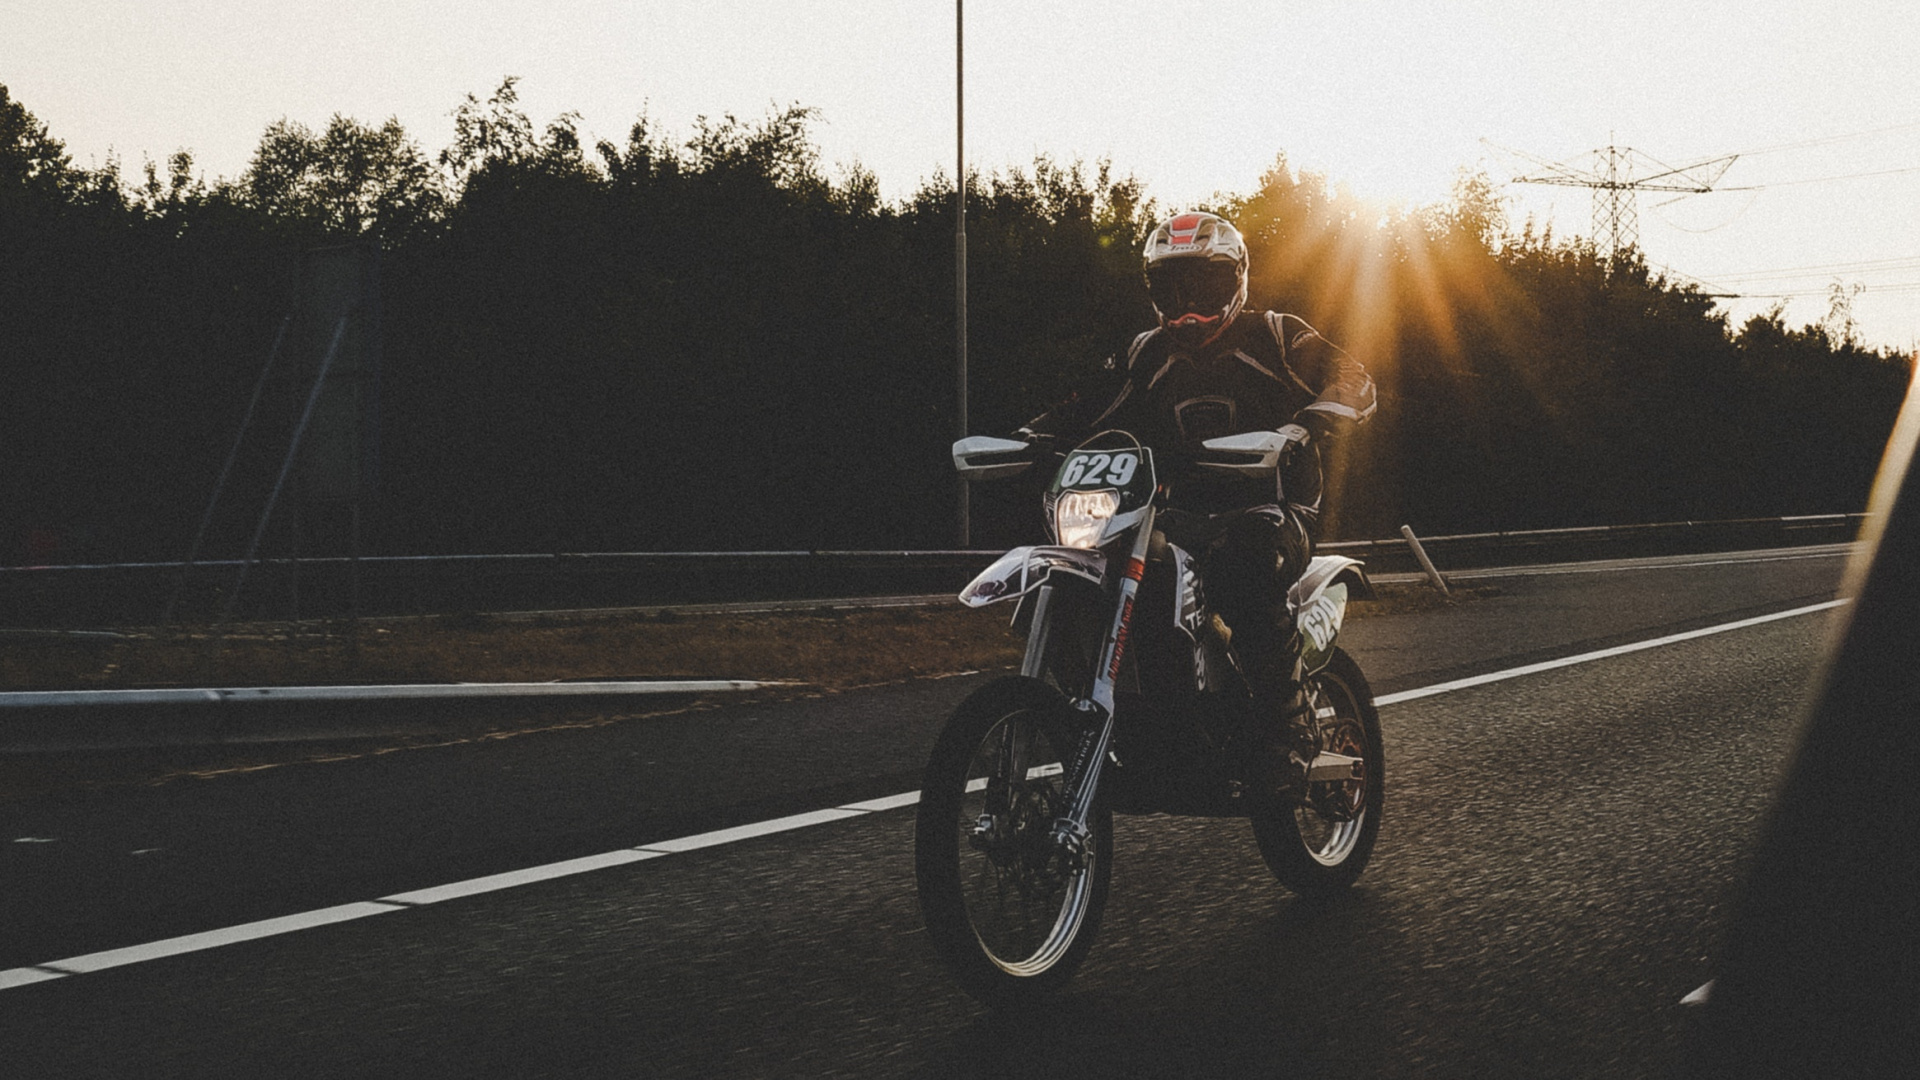 Man Riding Motorcycle on Road During Sunset. Wallpaper in 1920x1080 Resolution